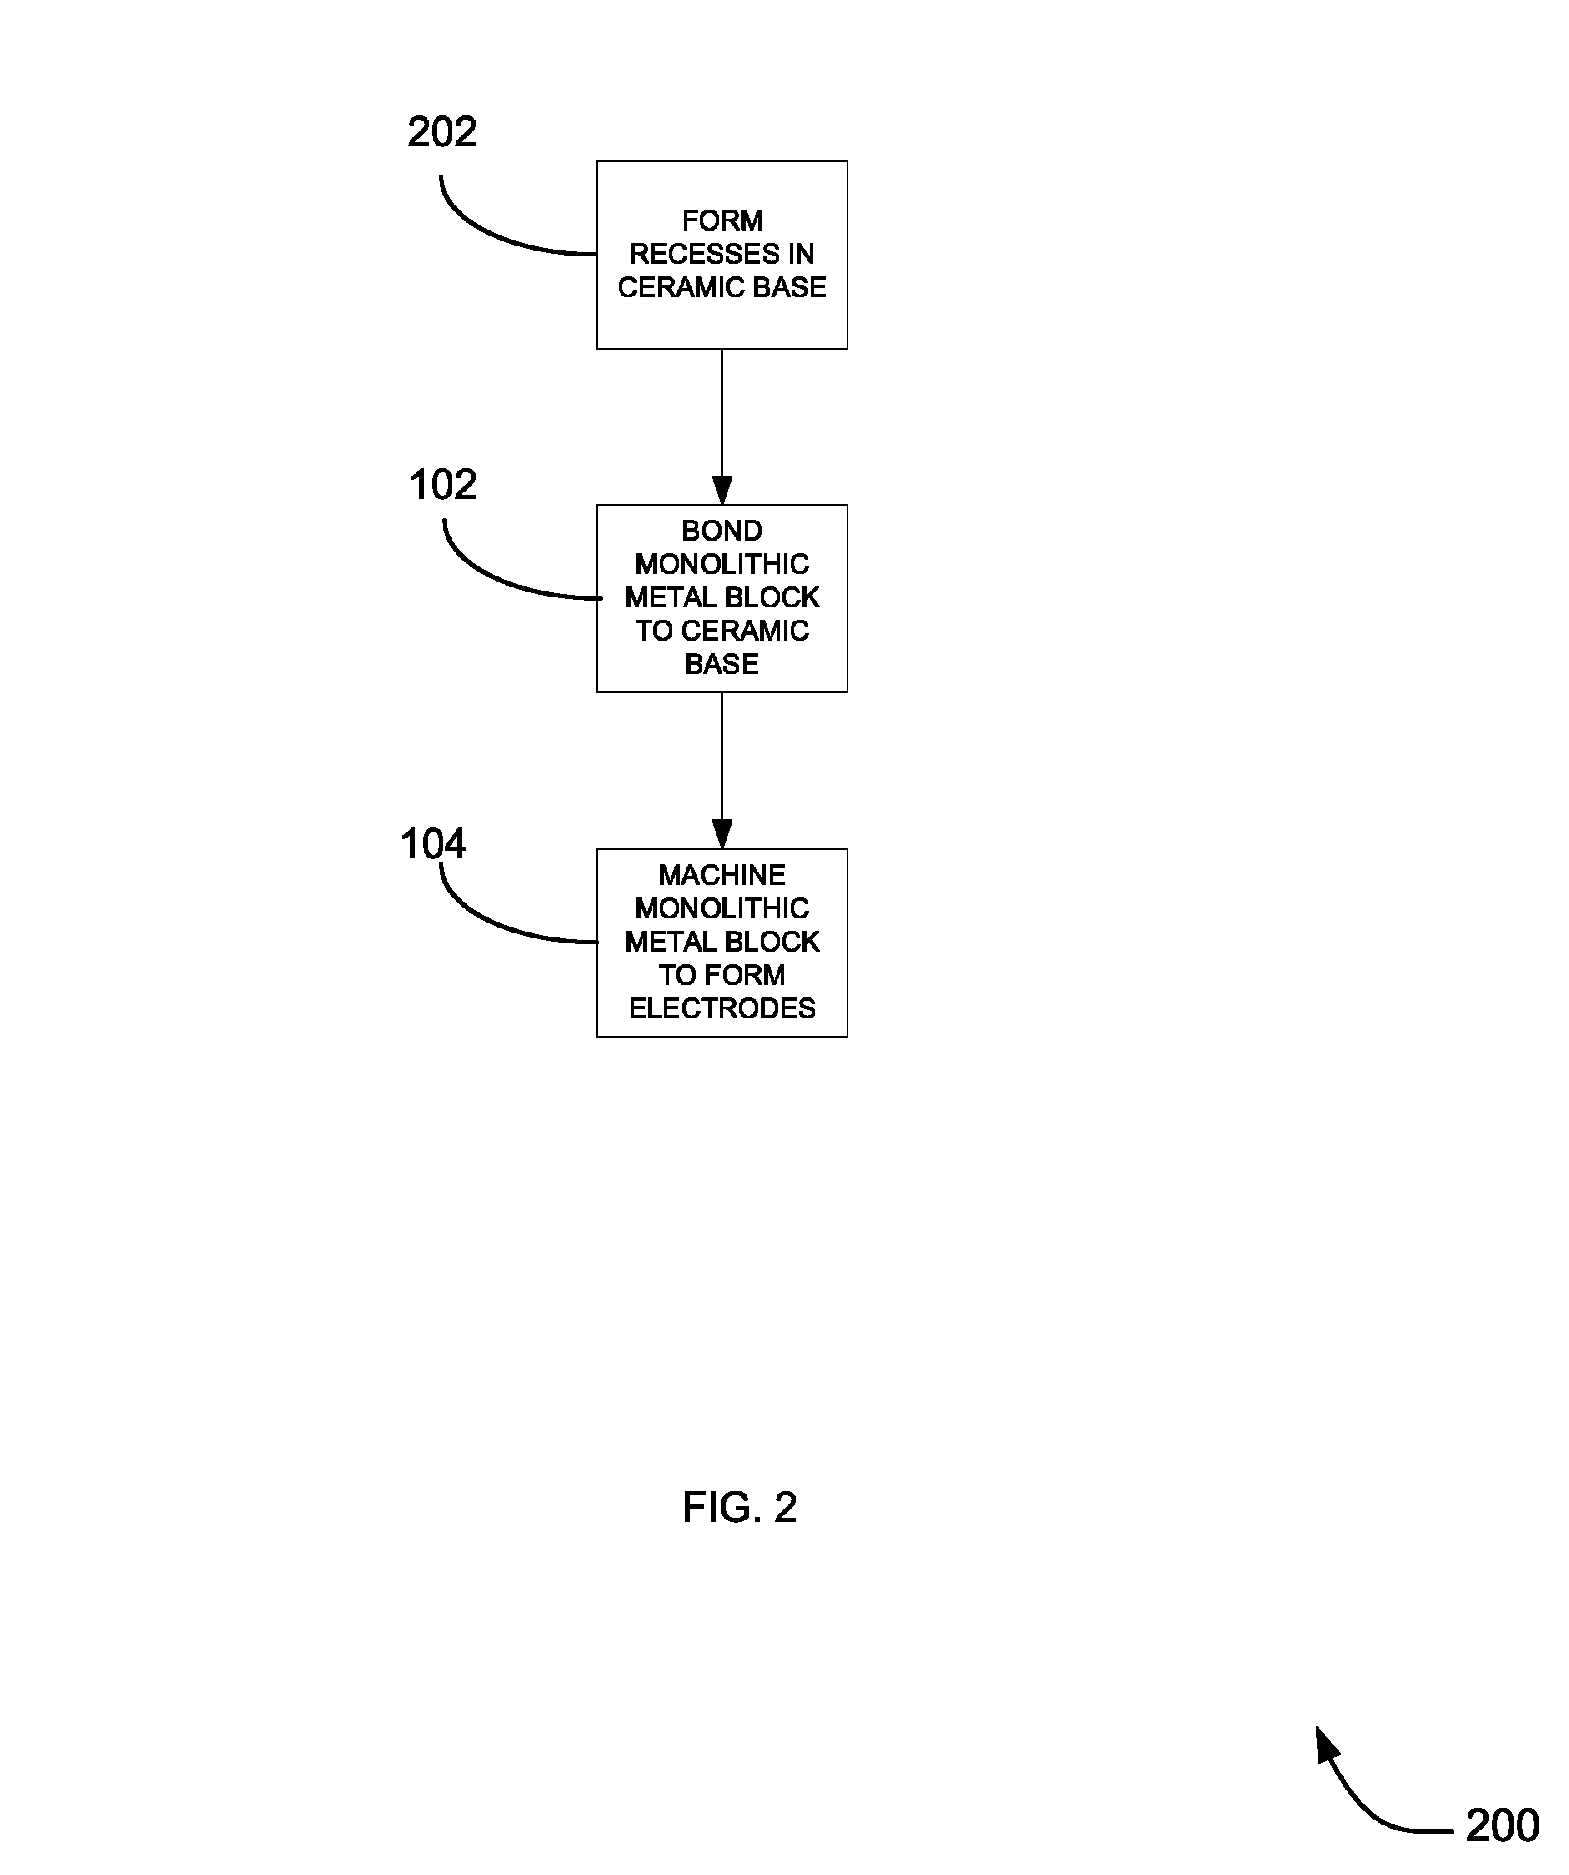 Apparatus and methods for producing multi-electrode cathode for X-ray tube